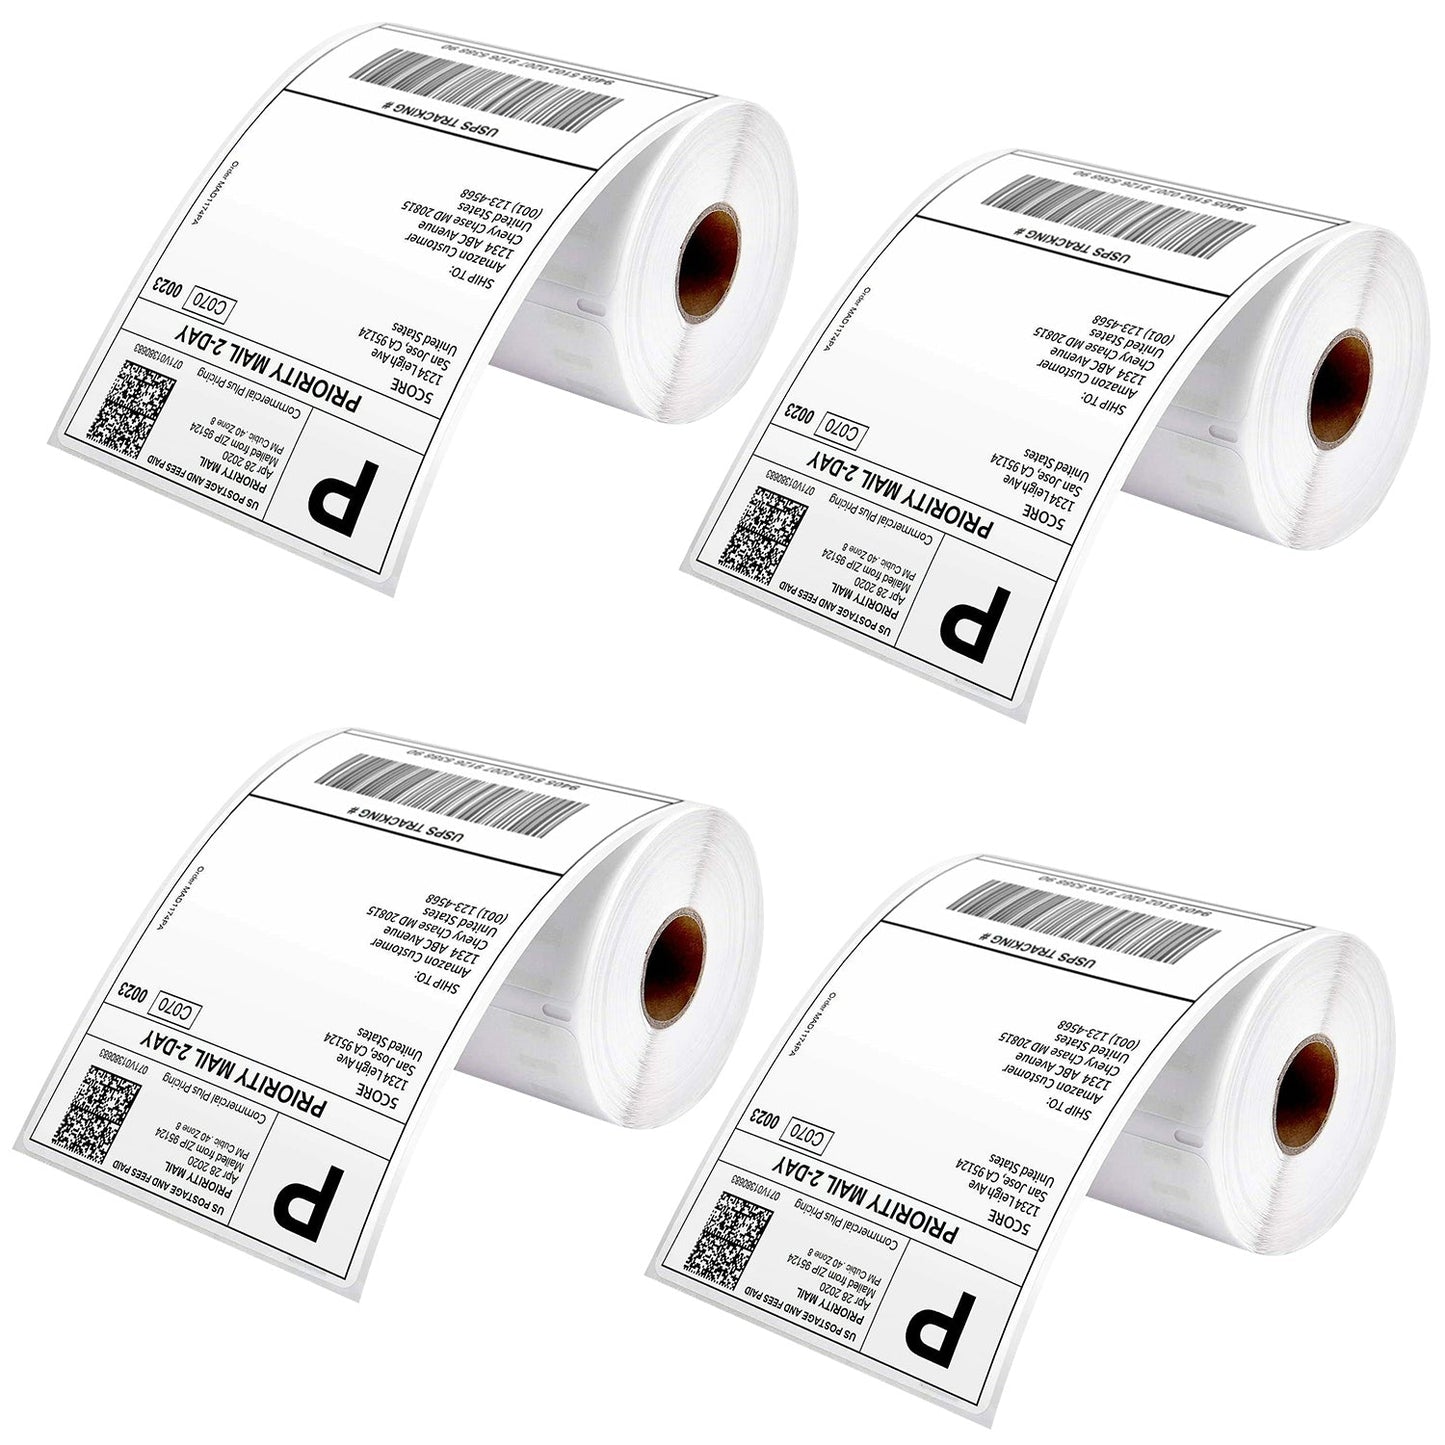 Kcubeinc 4"x6" Direct Thermal Shipping Label/ 4x6 4 Rolls Direct 250/paper Sticker/Perforated White Mailing Labels, Commercial Grade, Premium Adhesive, Compatible with Most Thermal Printers- DTL 4PK